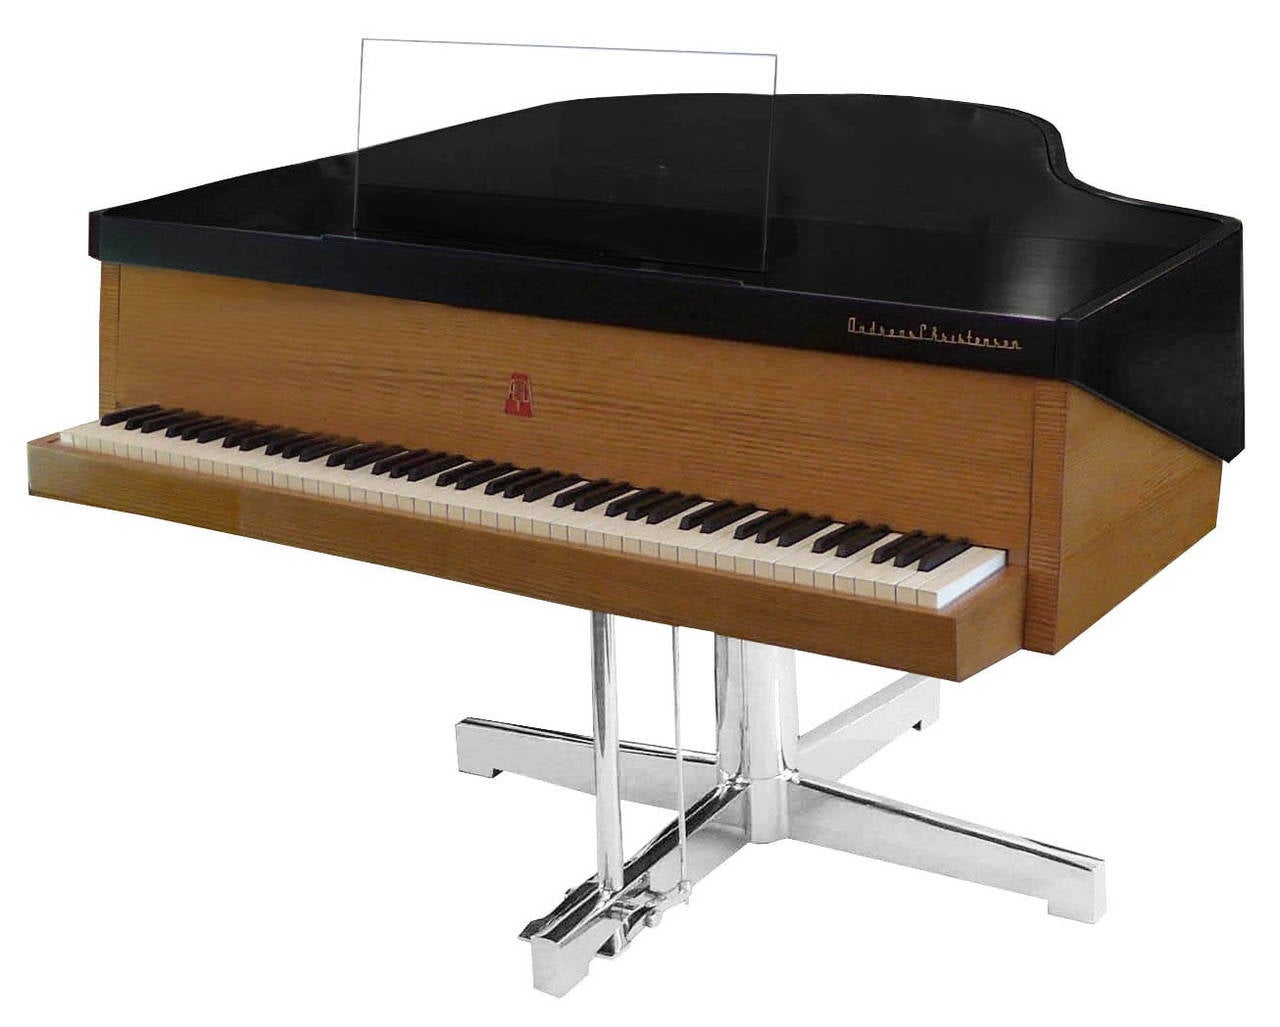 Lacquered Modernist Piano by Torben Christensen for Andreas Christensen